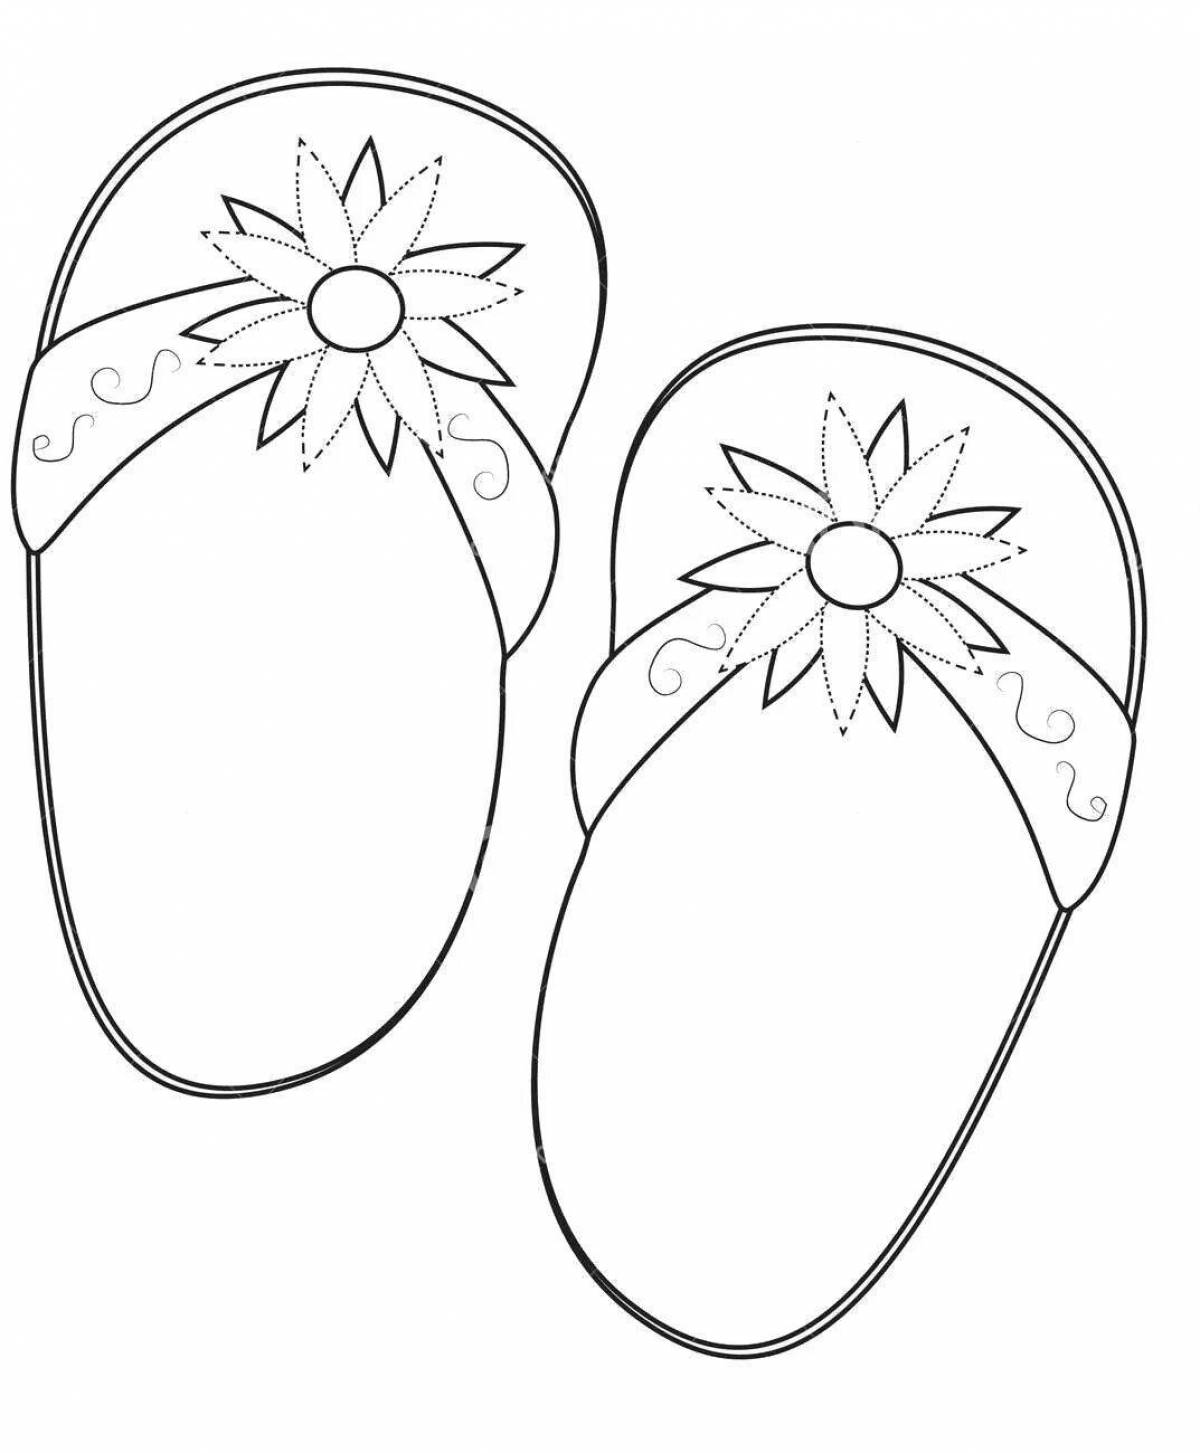 Coloring colorful slippers for kids